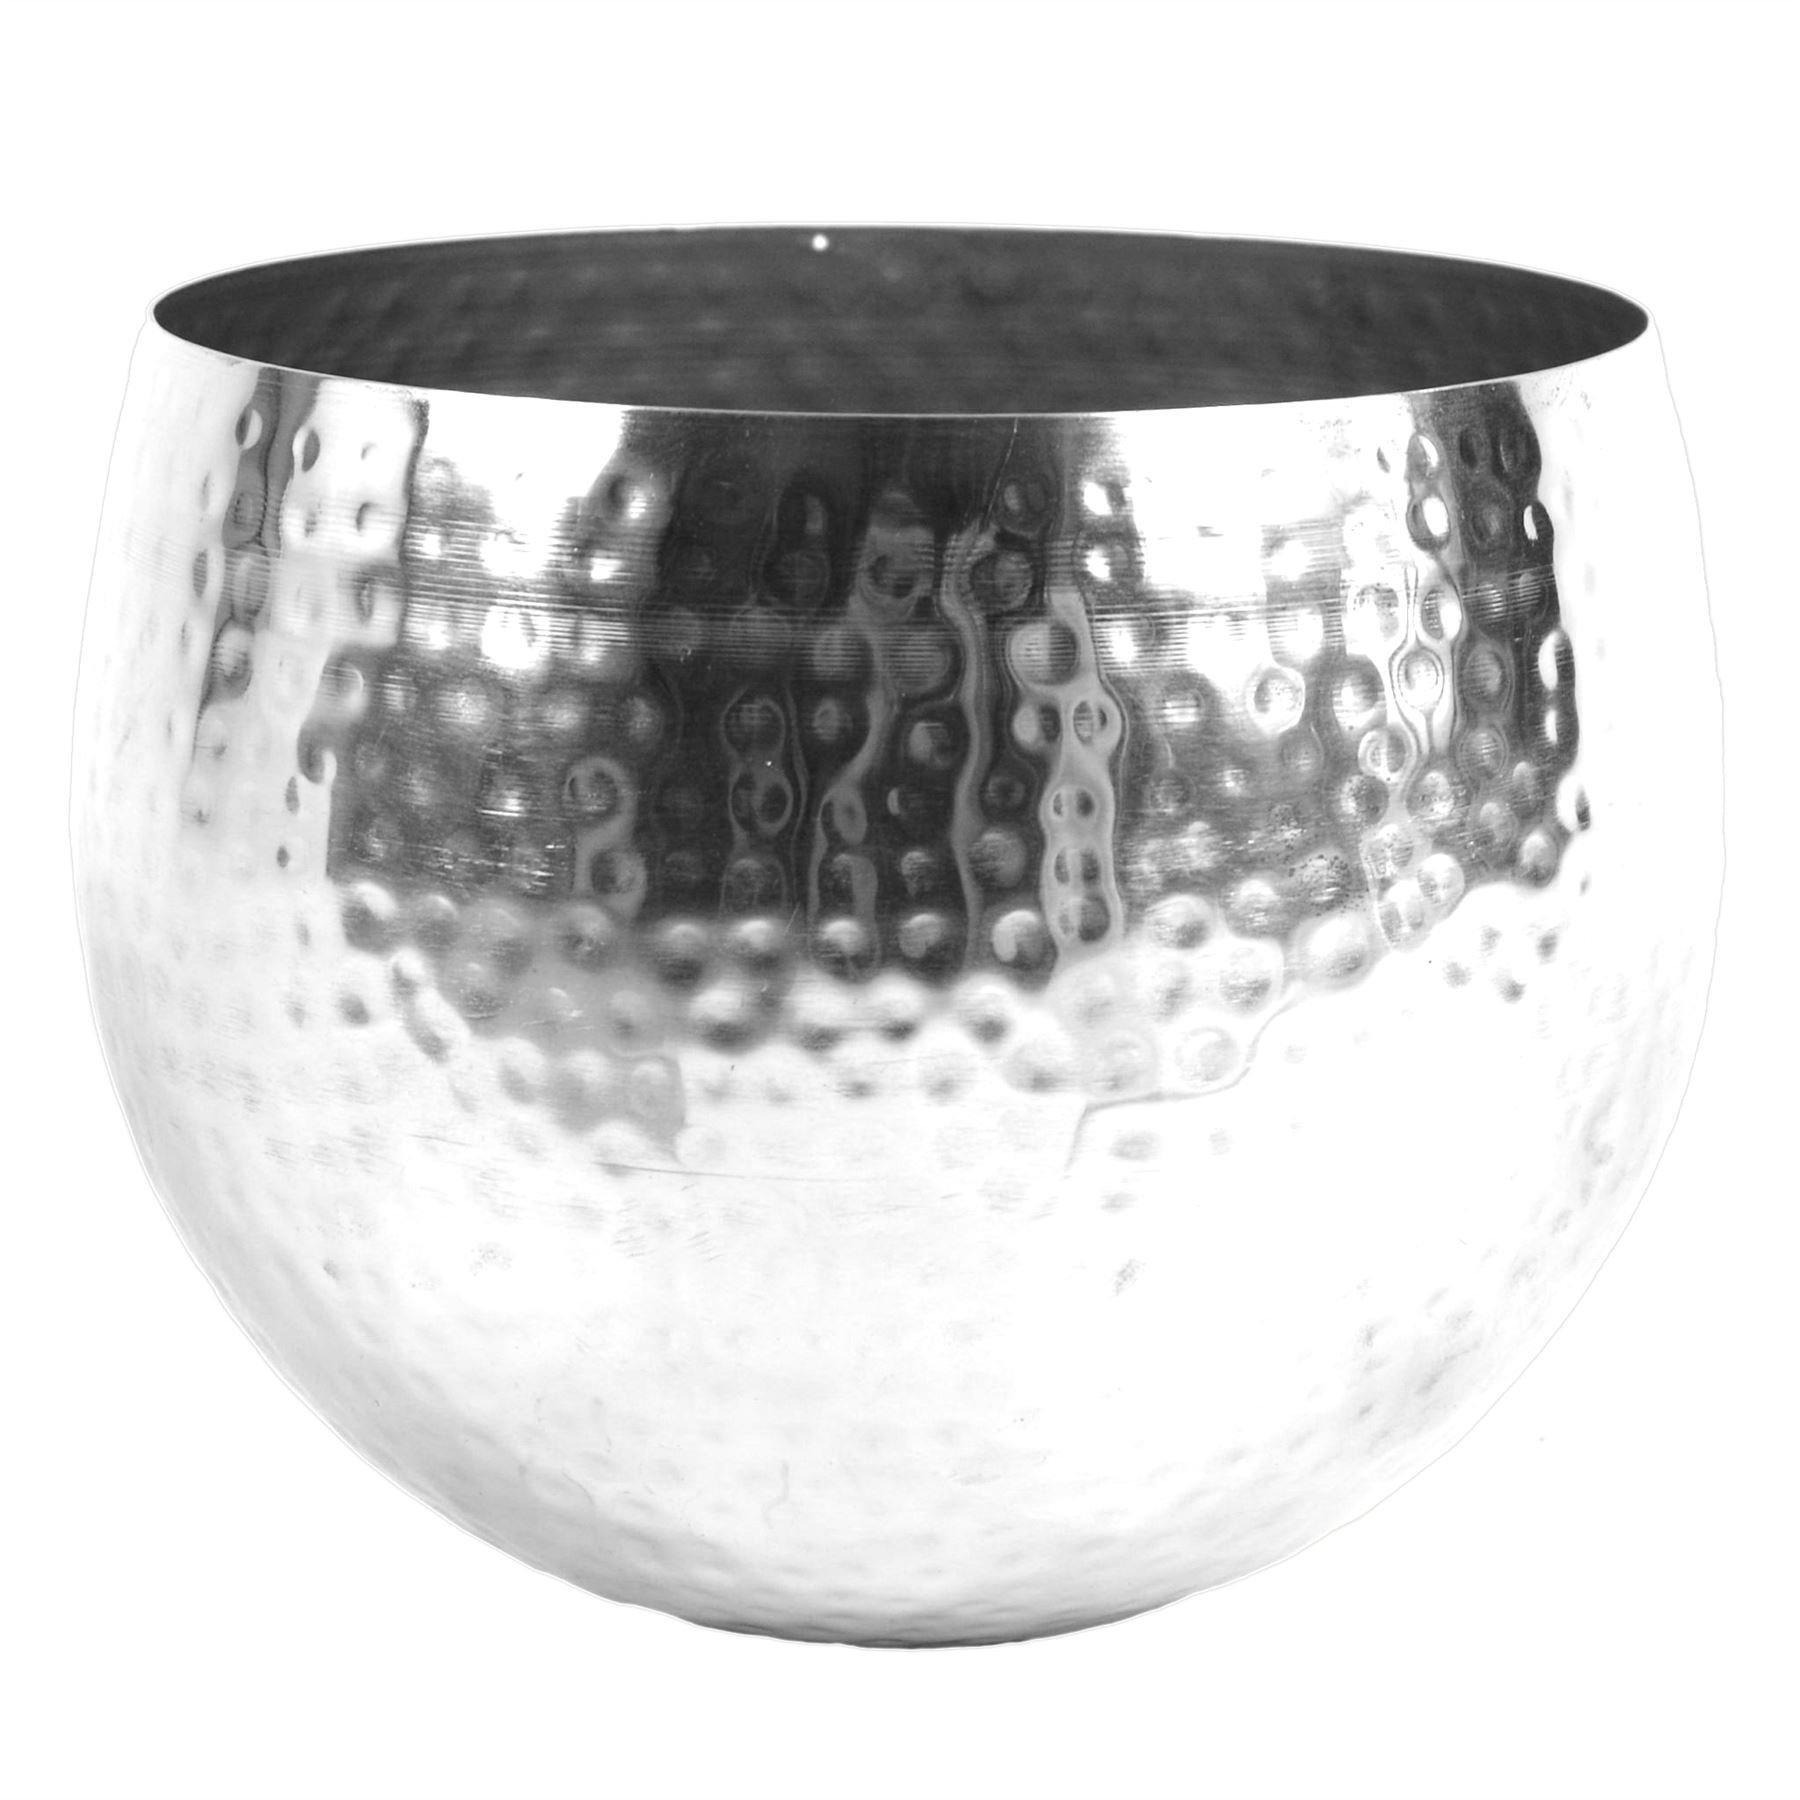 Large Metal bowl 22 x 18cm Hammered Silver Colour - Straight Edge - image 1